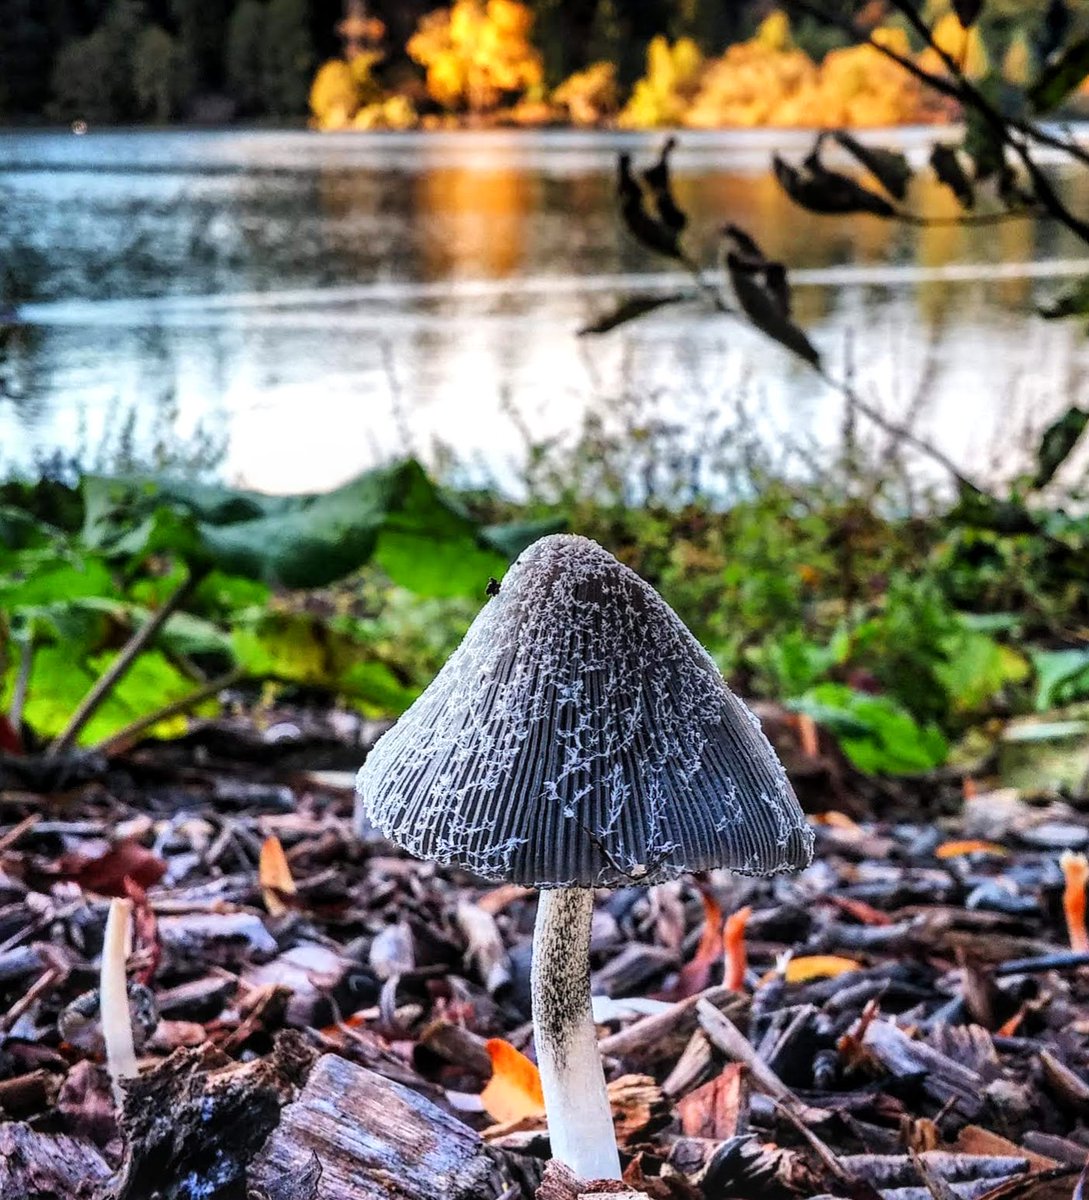 Hello Tuesday!
Spotted the cutest mushroom at Lost Lagoon!
#throwbacktuesday #lostlagoon #wildmushrooms #StormHour #october #BCStorm #Vancouver #colourfulfall #stanleypark #ShareYourWeather #Tuesday